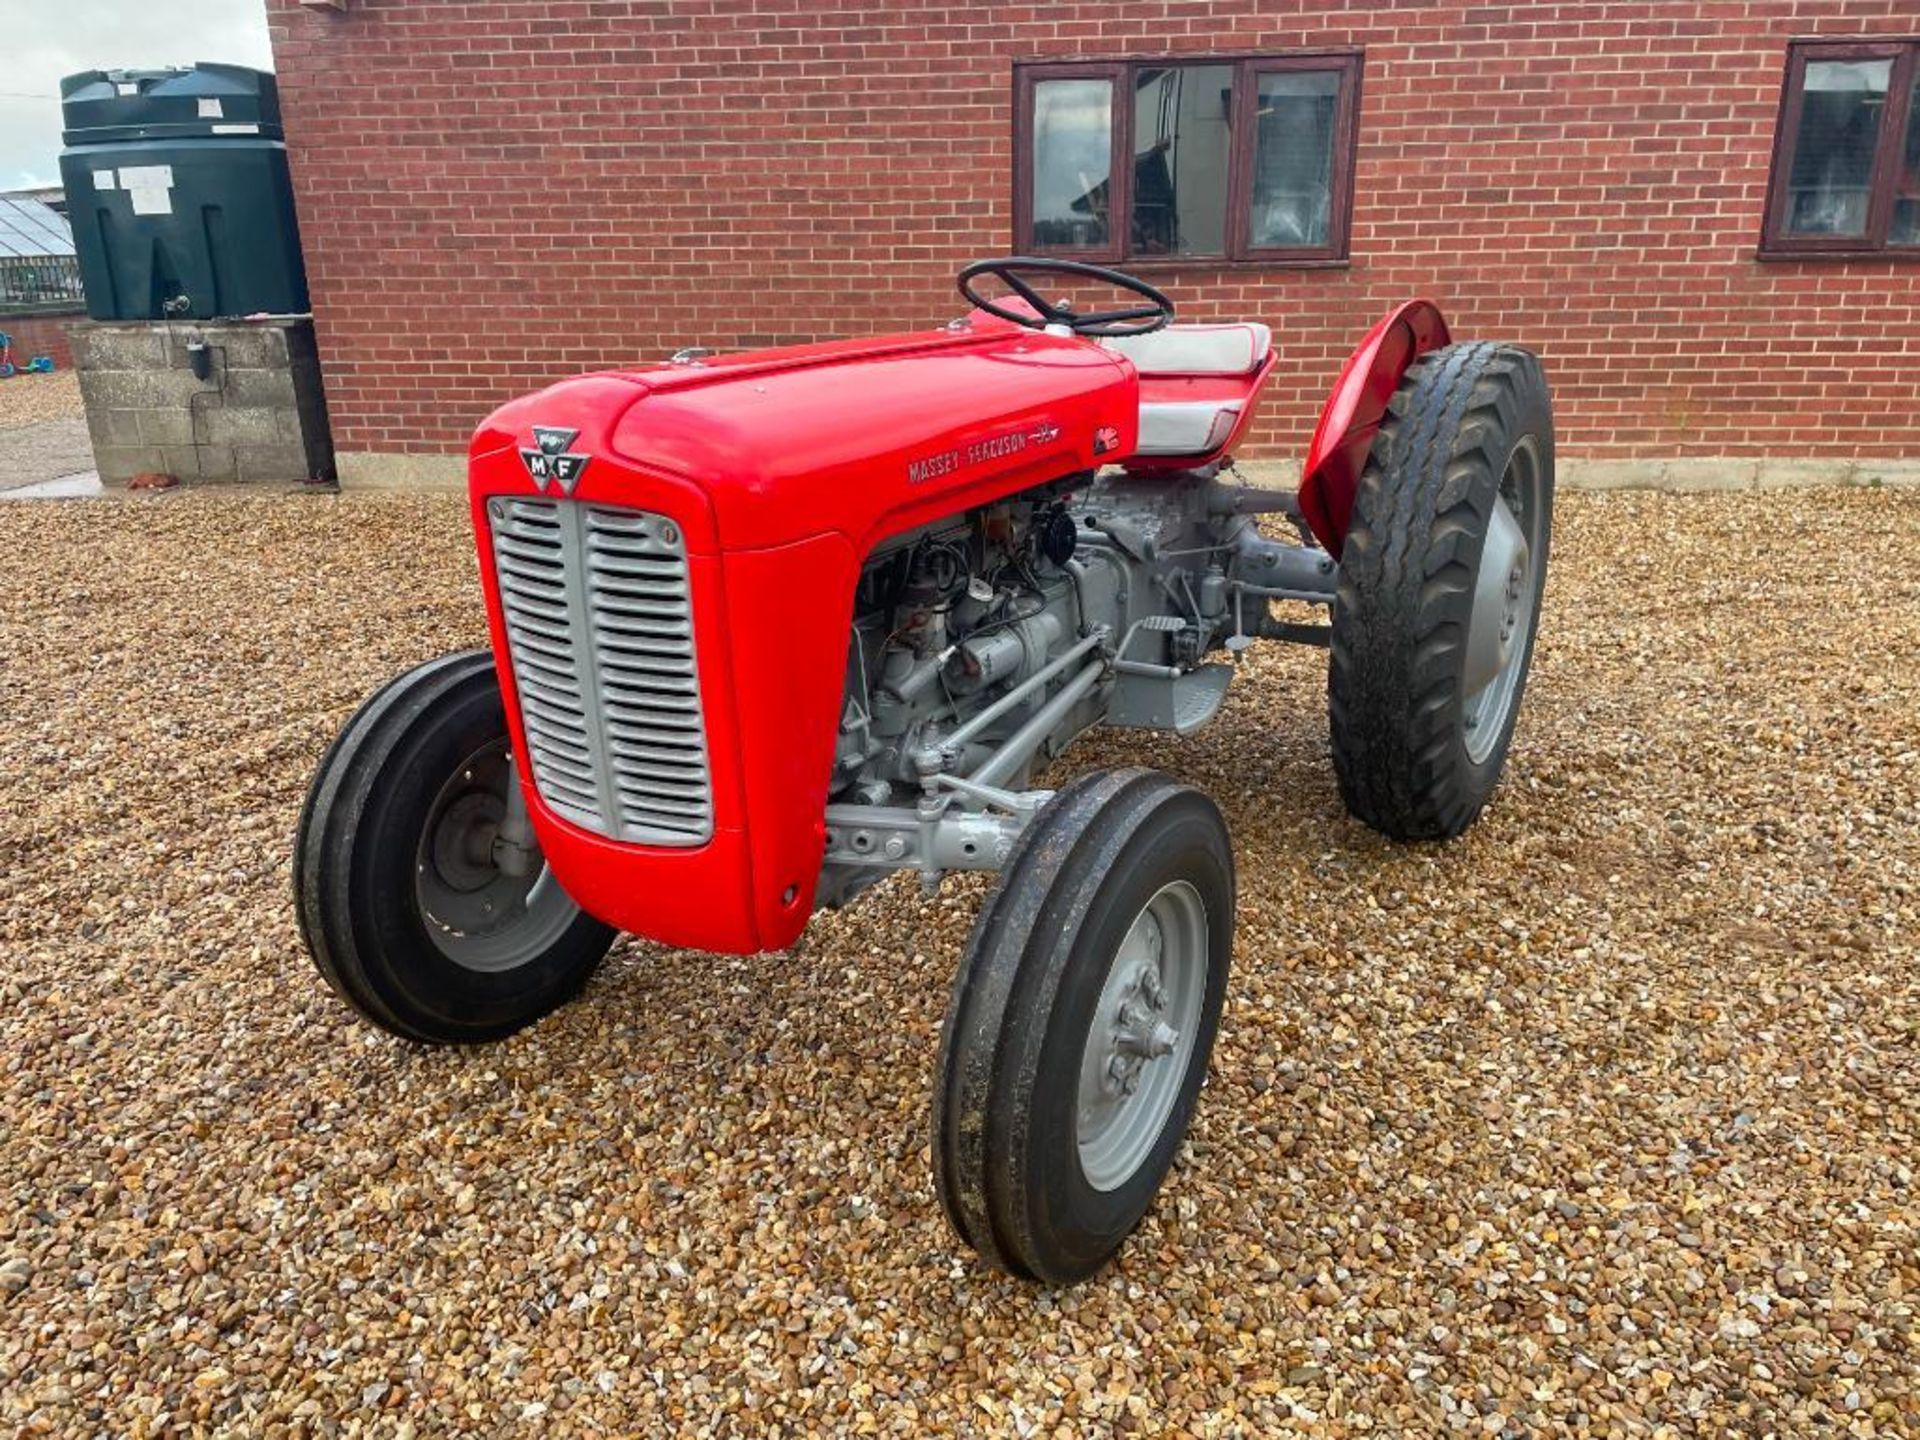 1962 Massey Ferguson 35 Industrial petrol 2wd tractor on 6.00-16 front and 10.00-28IND rear wheels a